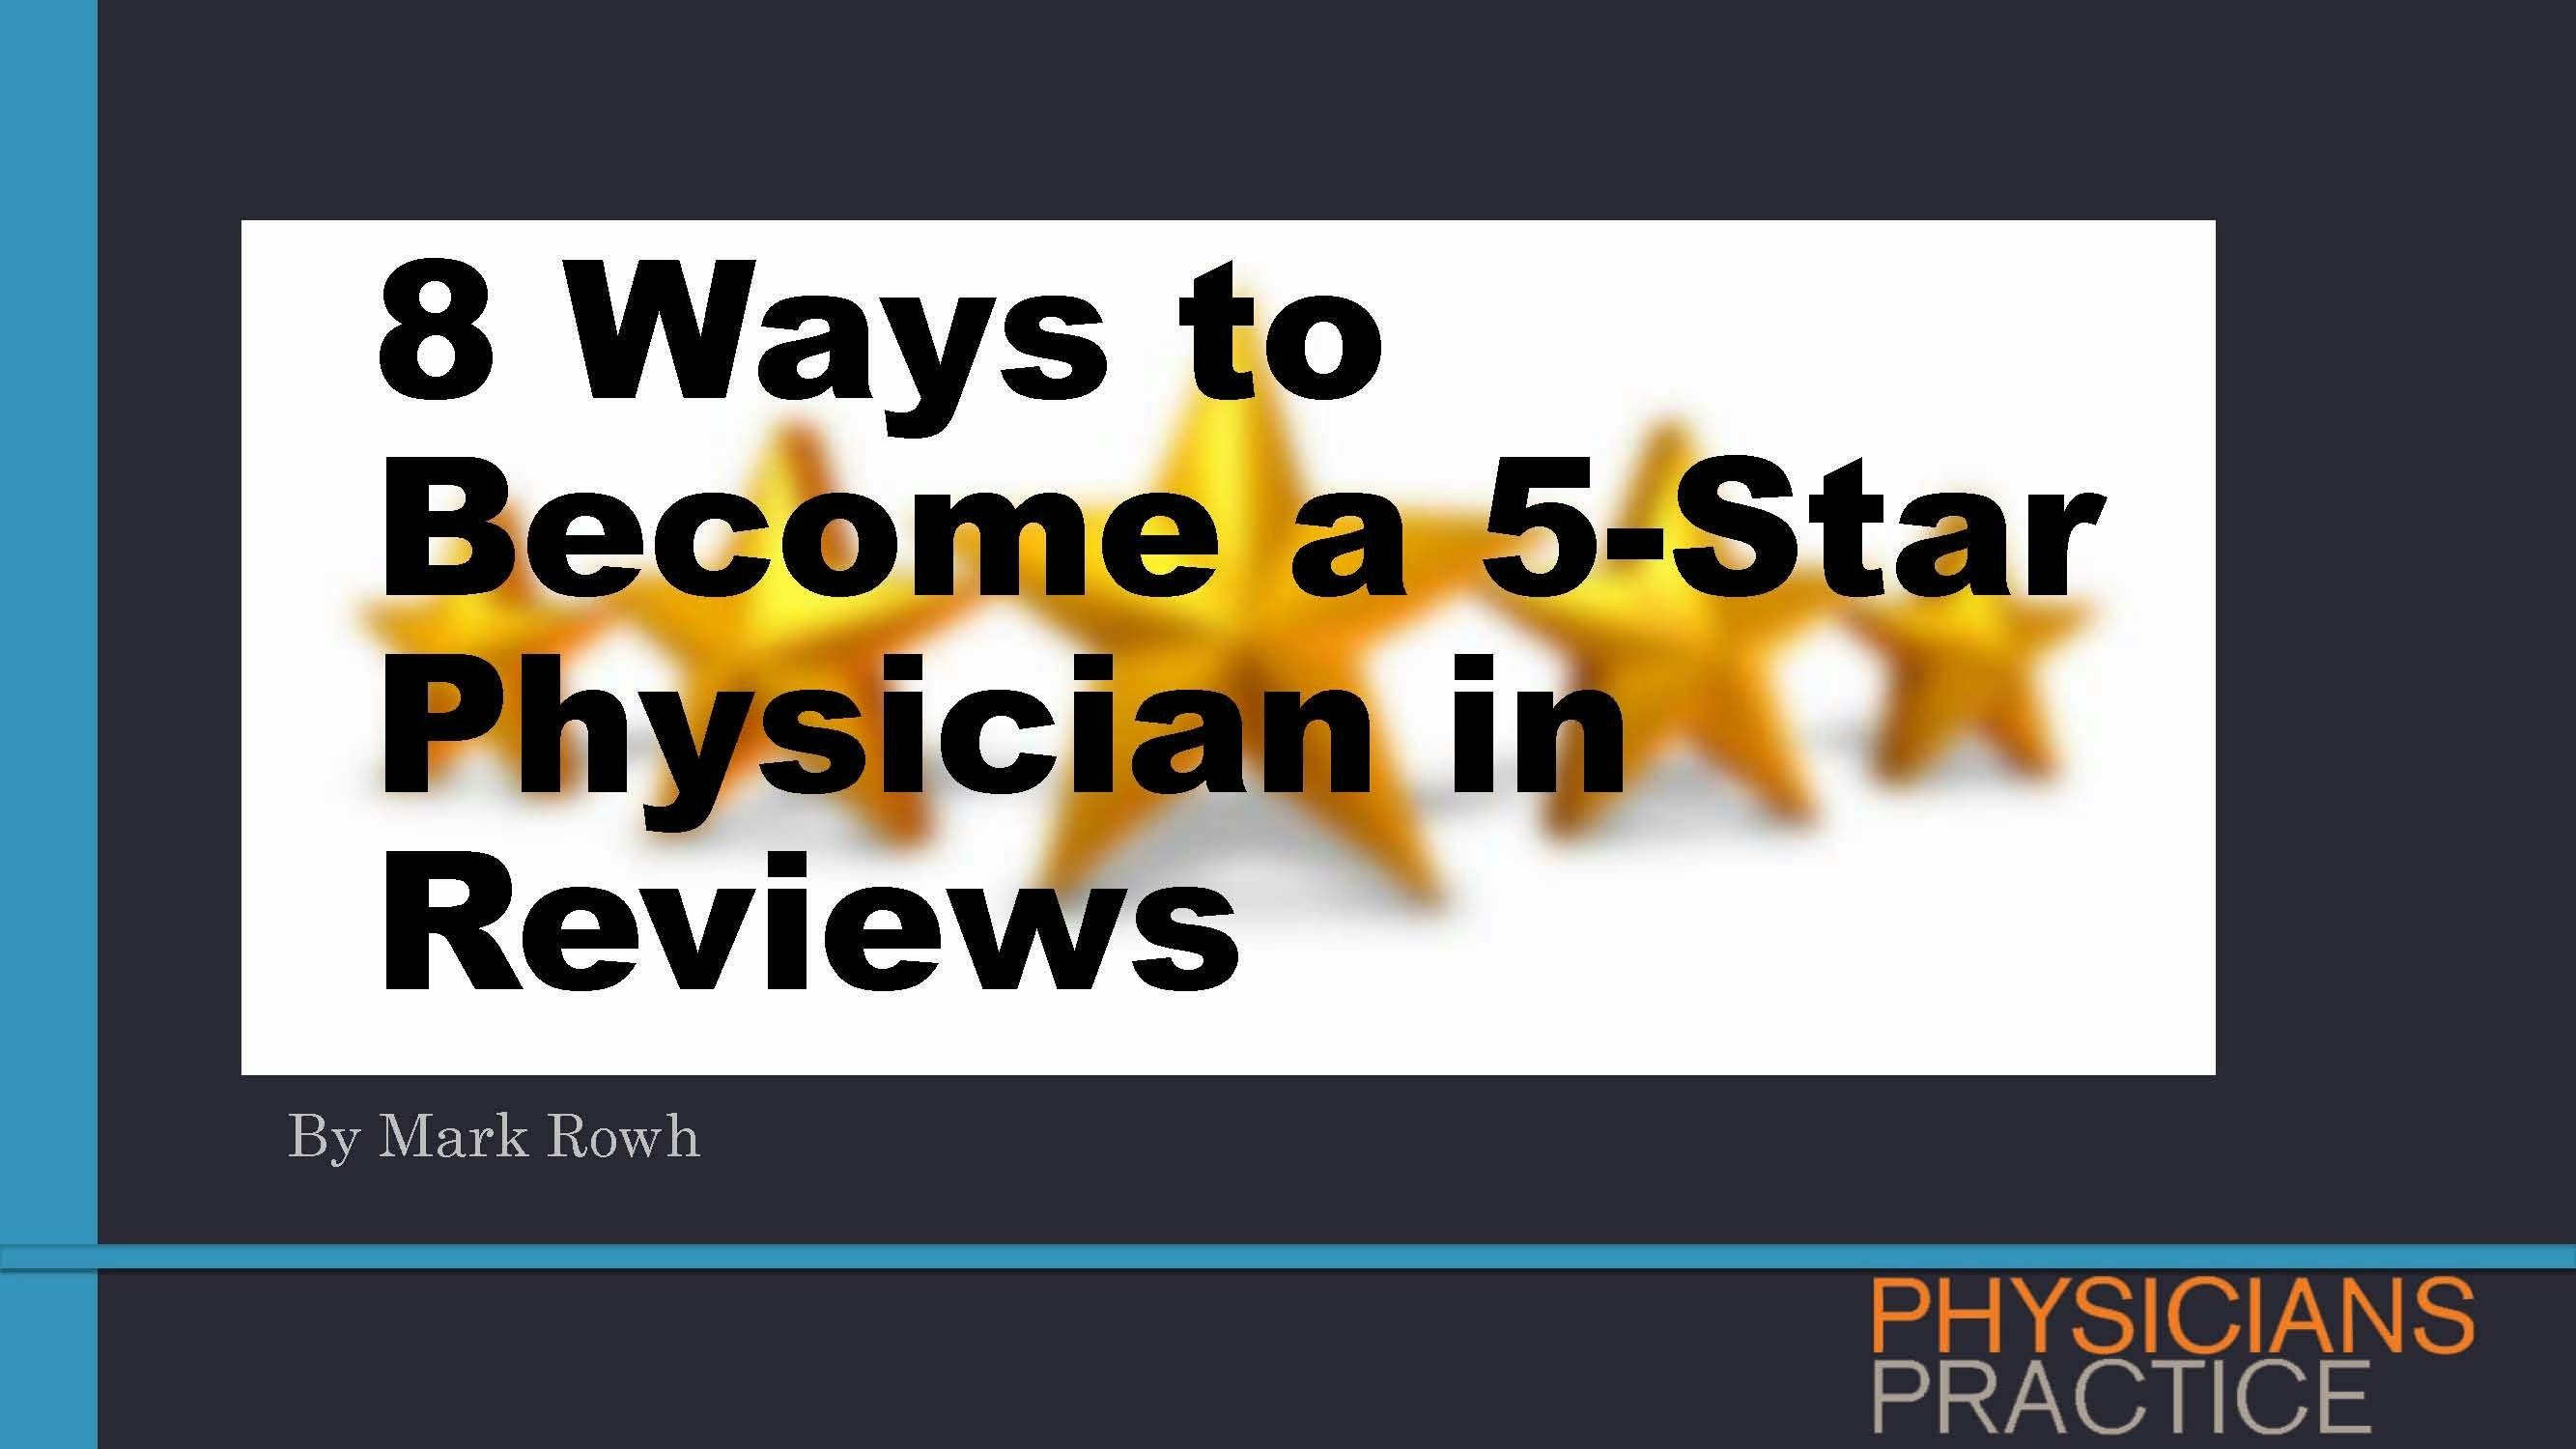 8 Ways to Become a 5-Star Physician in Reviews